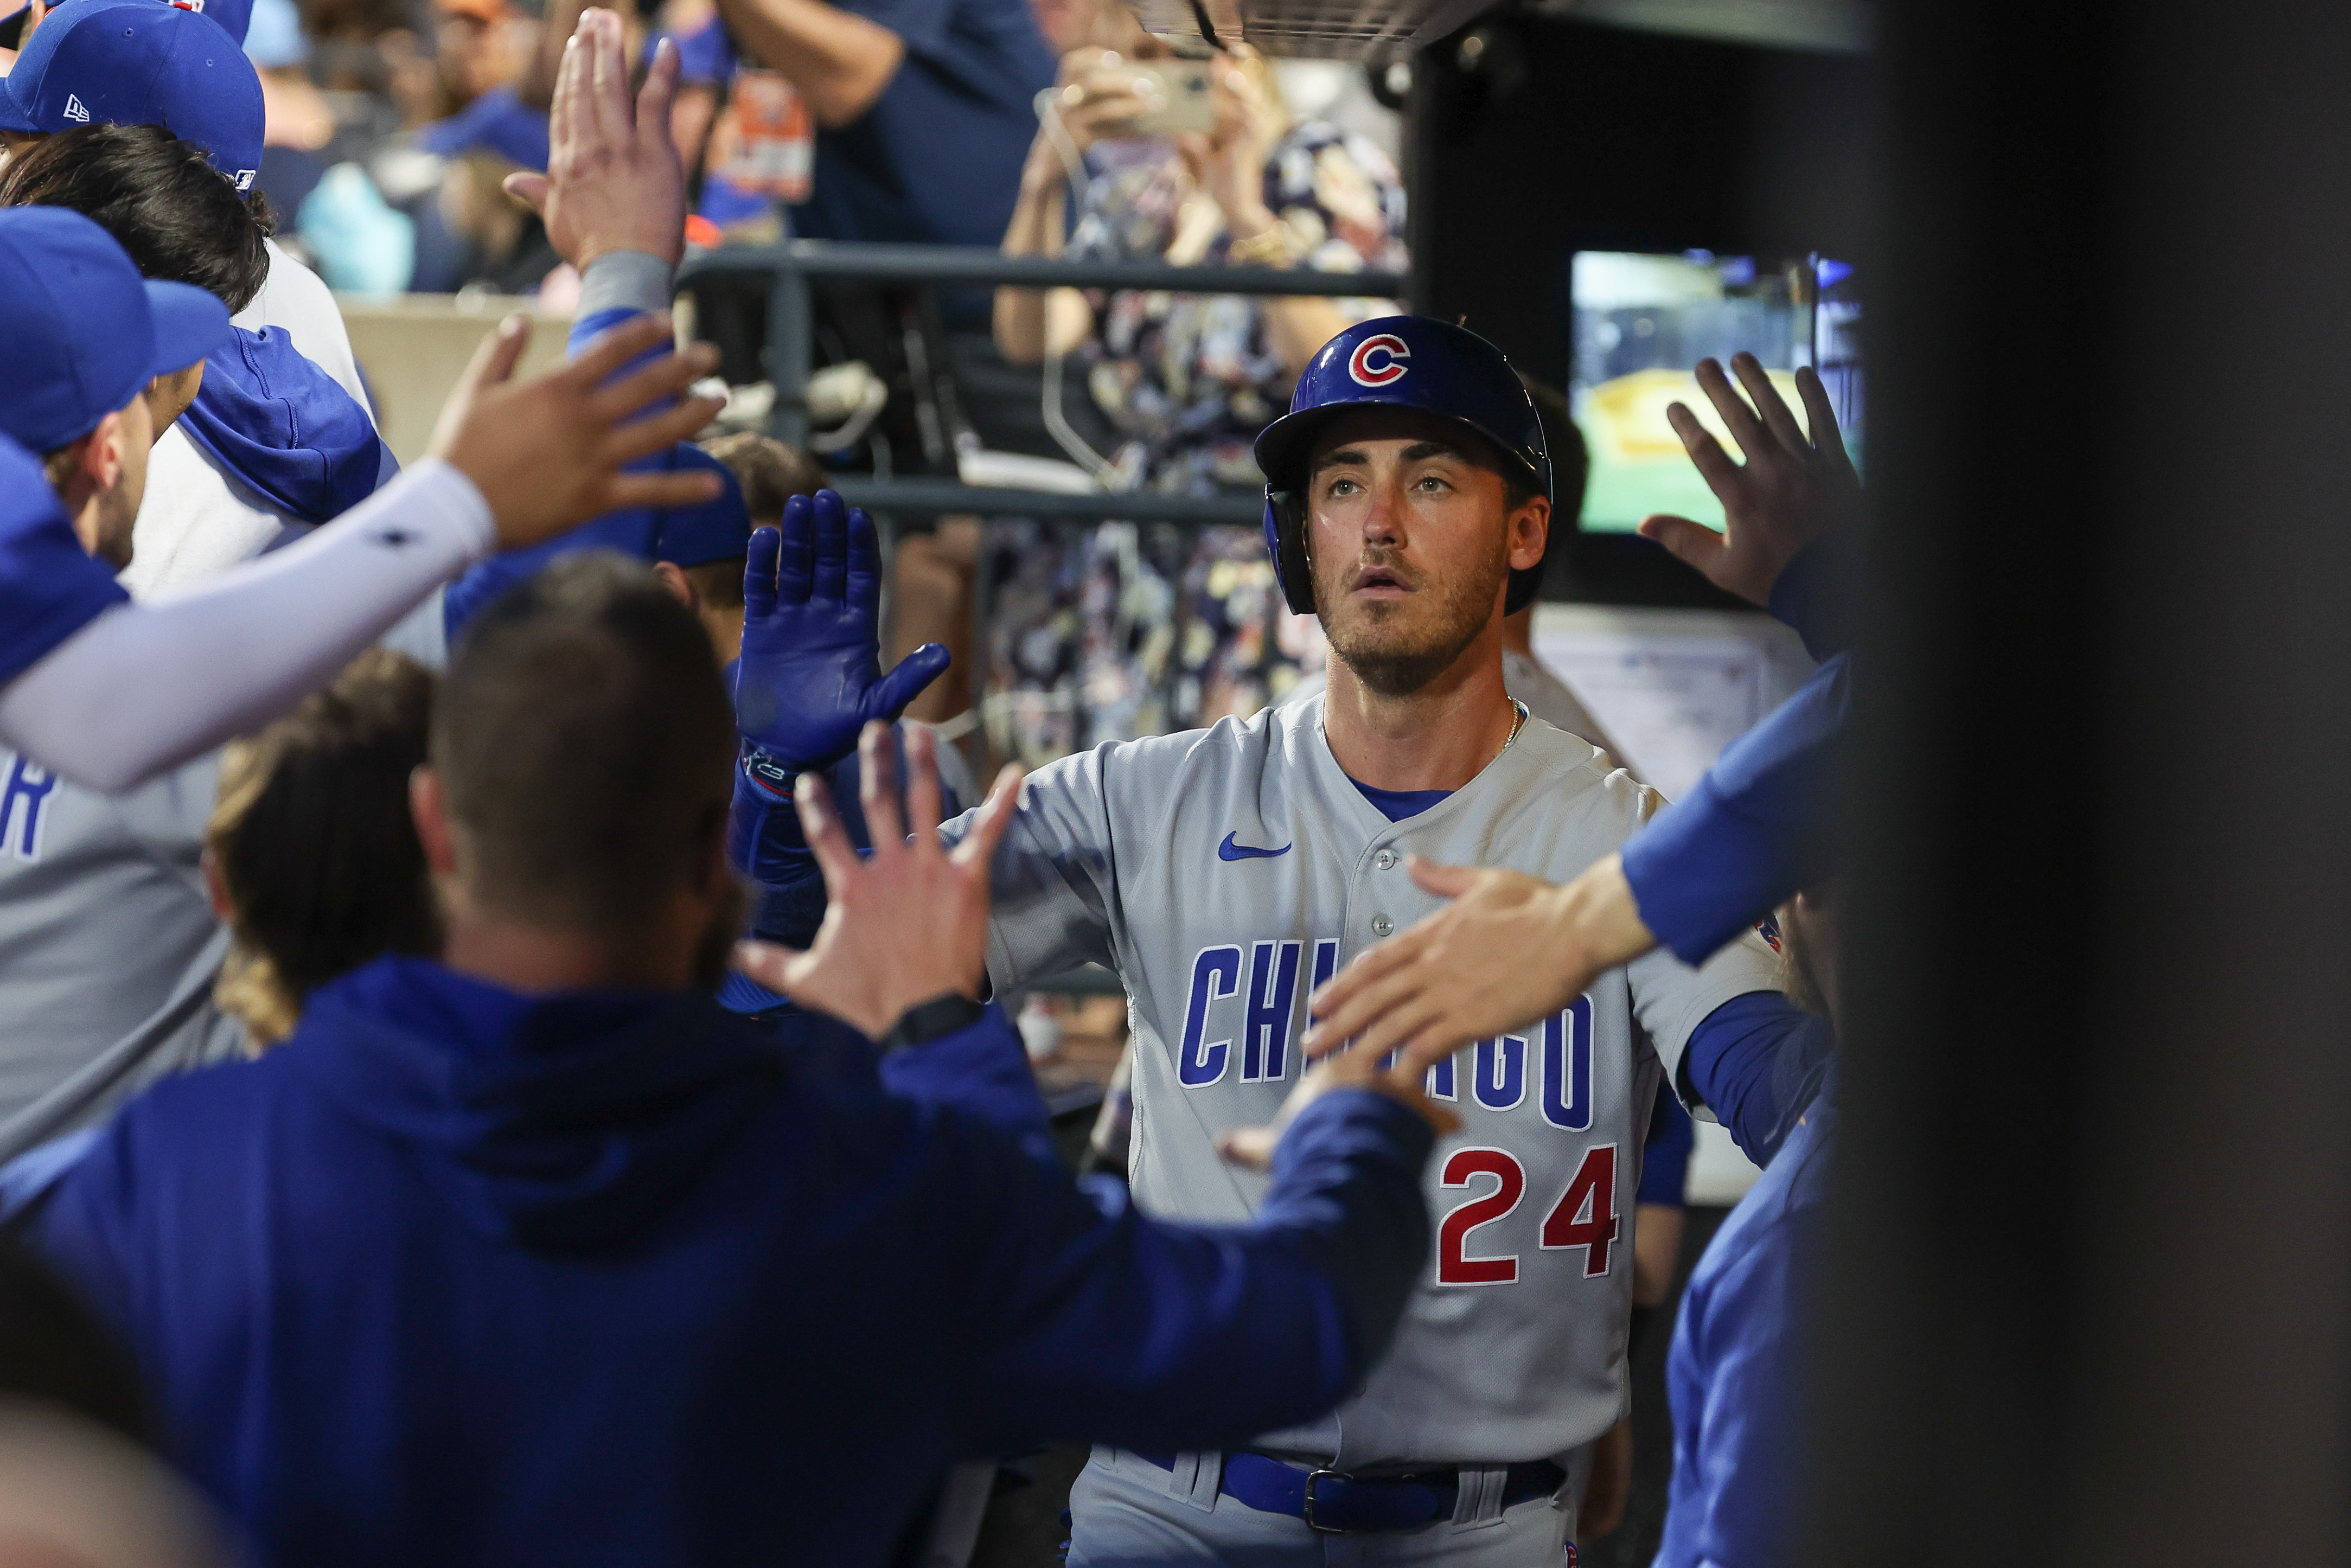 Cubs move into virtual tie for playoff spot by beating Mets